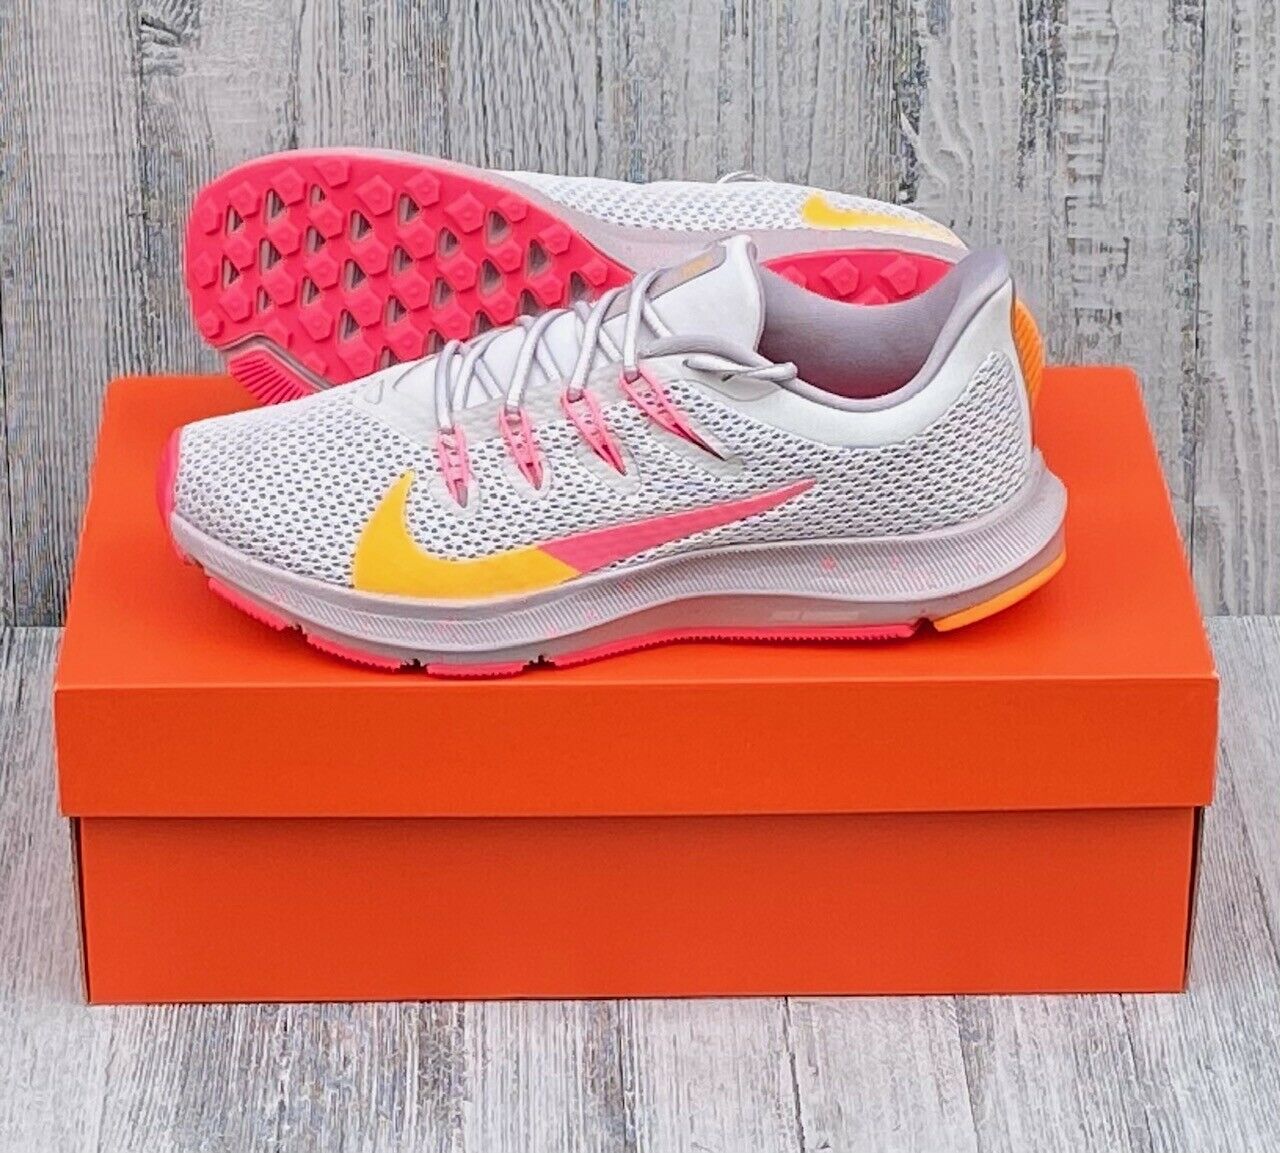 WOMENS NIKE QUEST 2 RUNNING SHOES / SIZE 8.5 / GREY-PINK / NEW